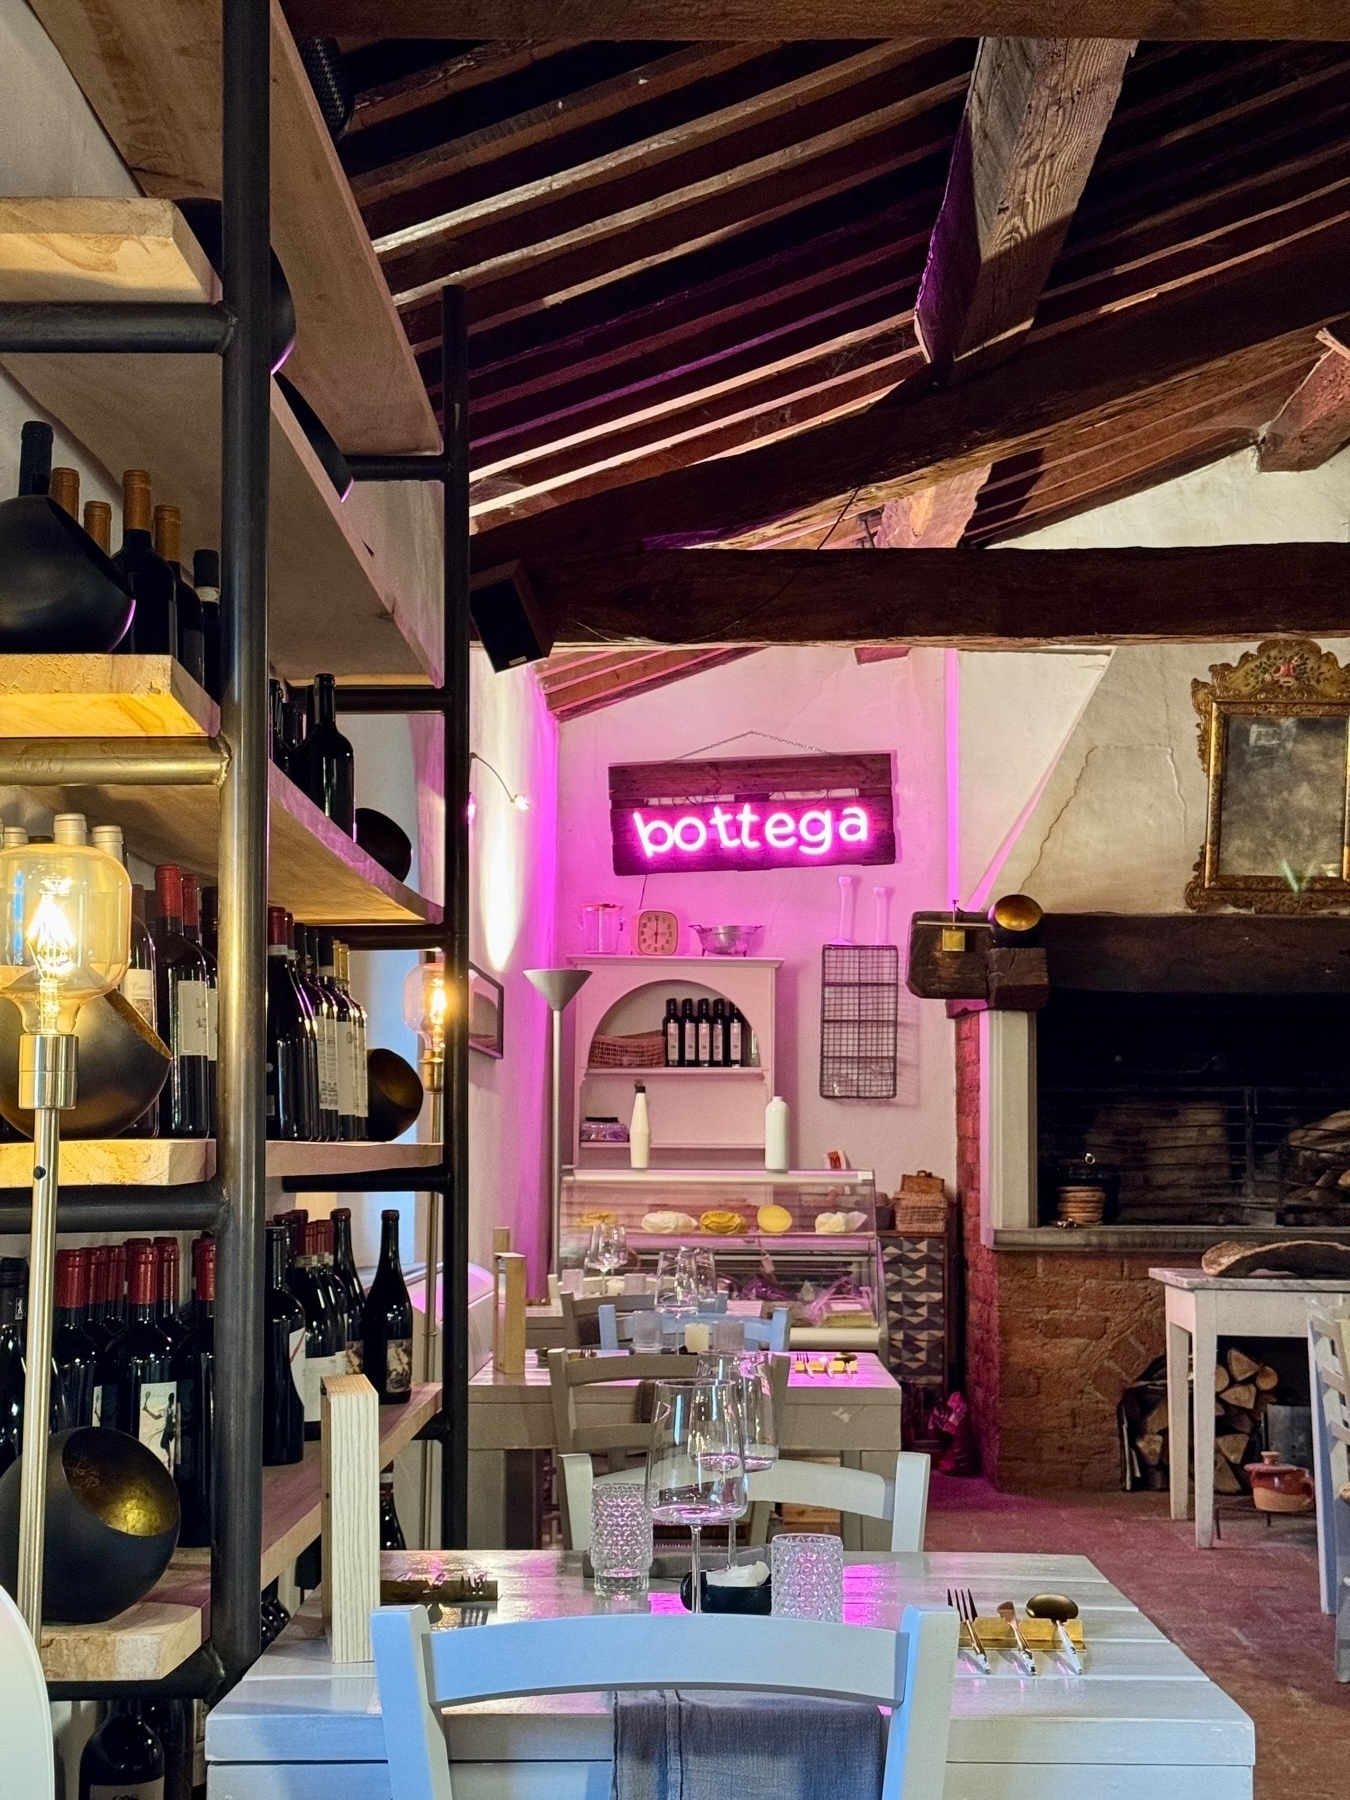 A cozy dining area with rustic wooden beams and shelves filled with wine bottles. The tables are set with glasses, cutlery, and candles. A neon sign reading “bottega” is illuminated in pink on the back wall, adding a modern touch. 